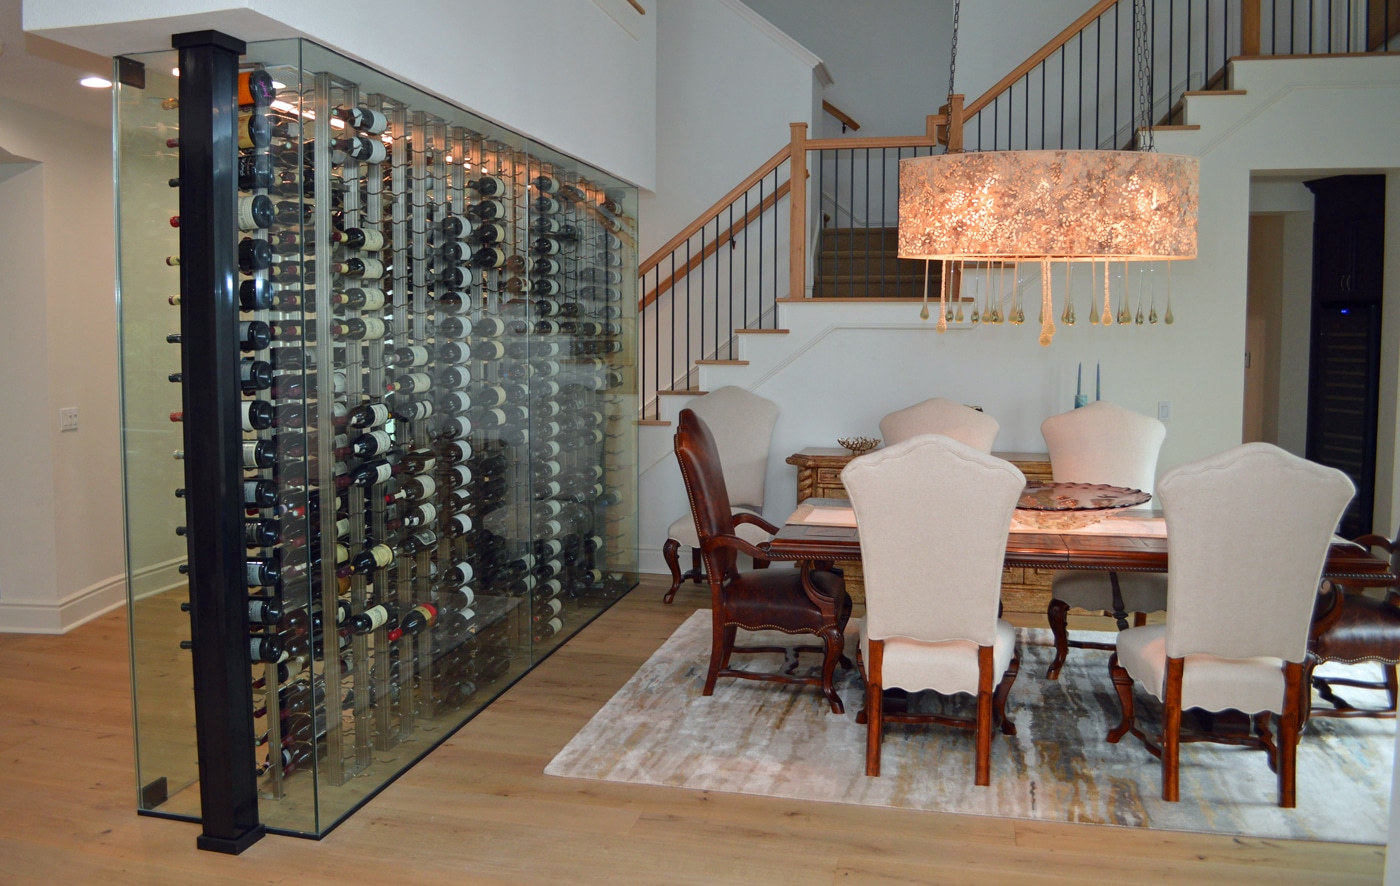 Dining Room Table In A Wine Cellar